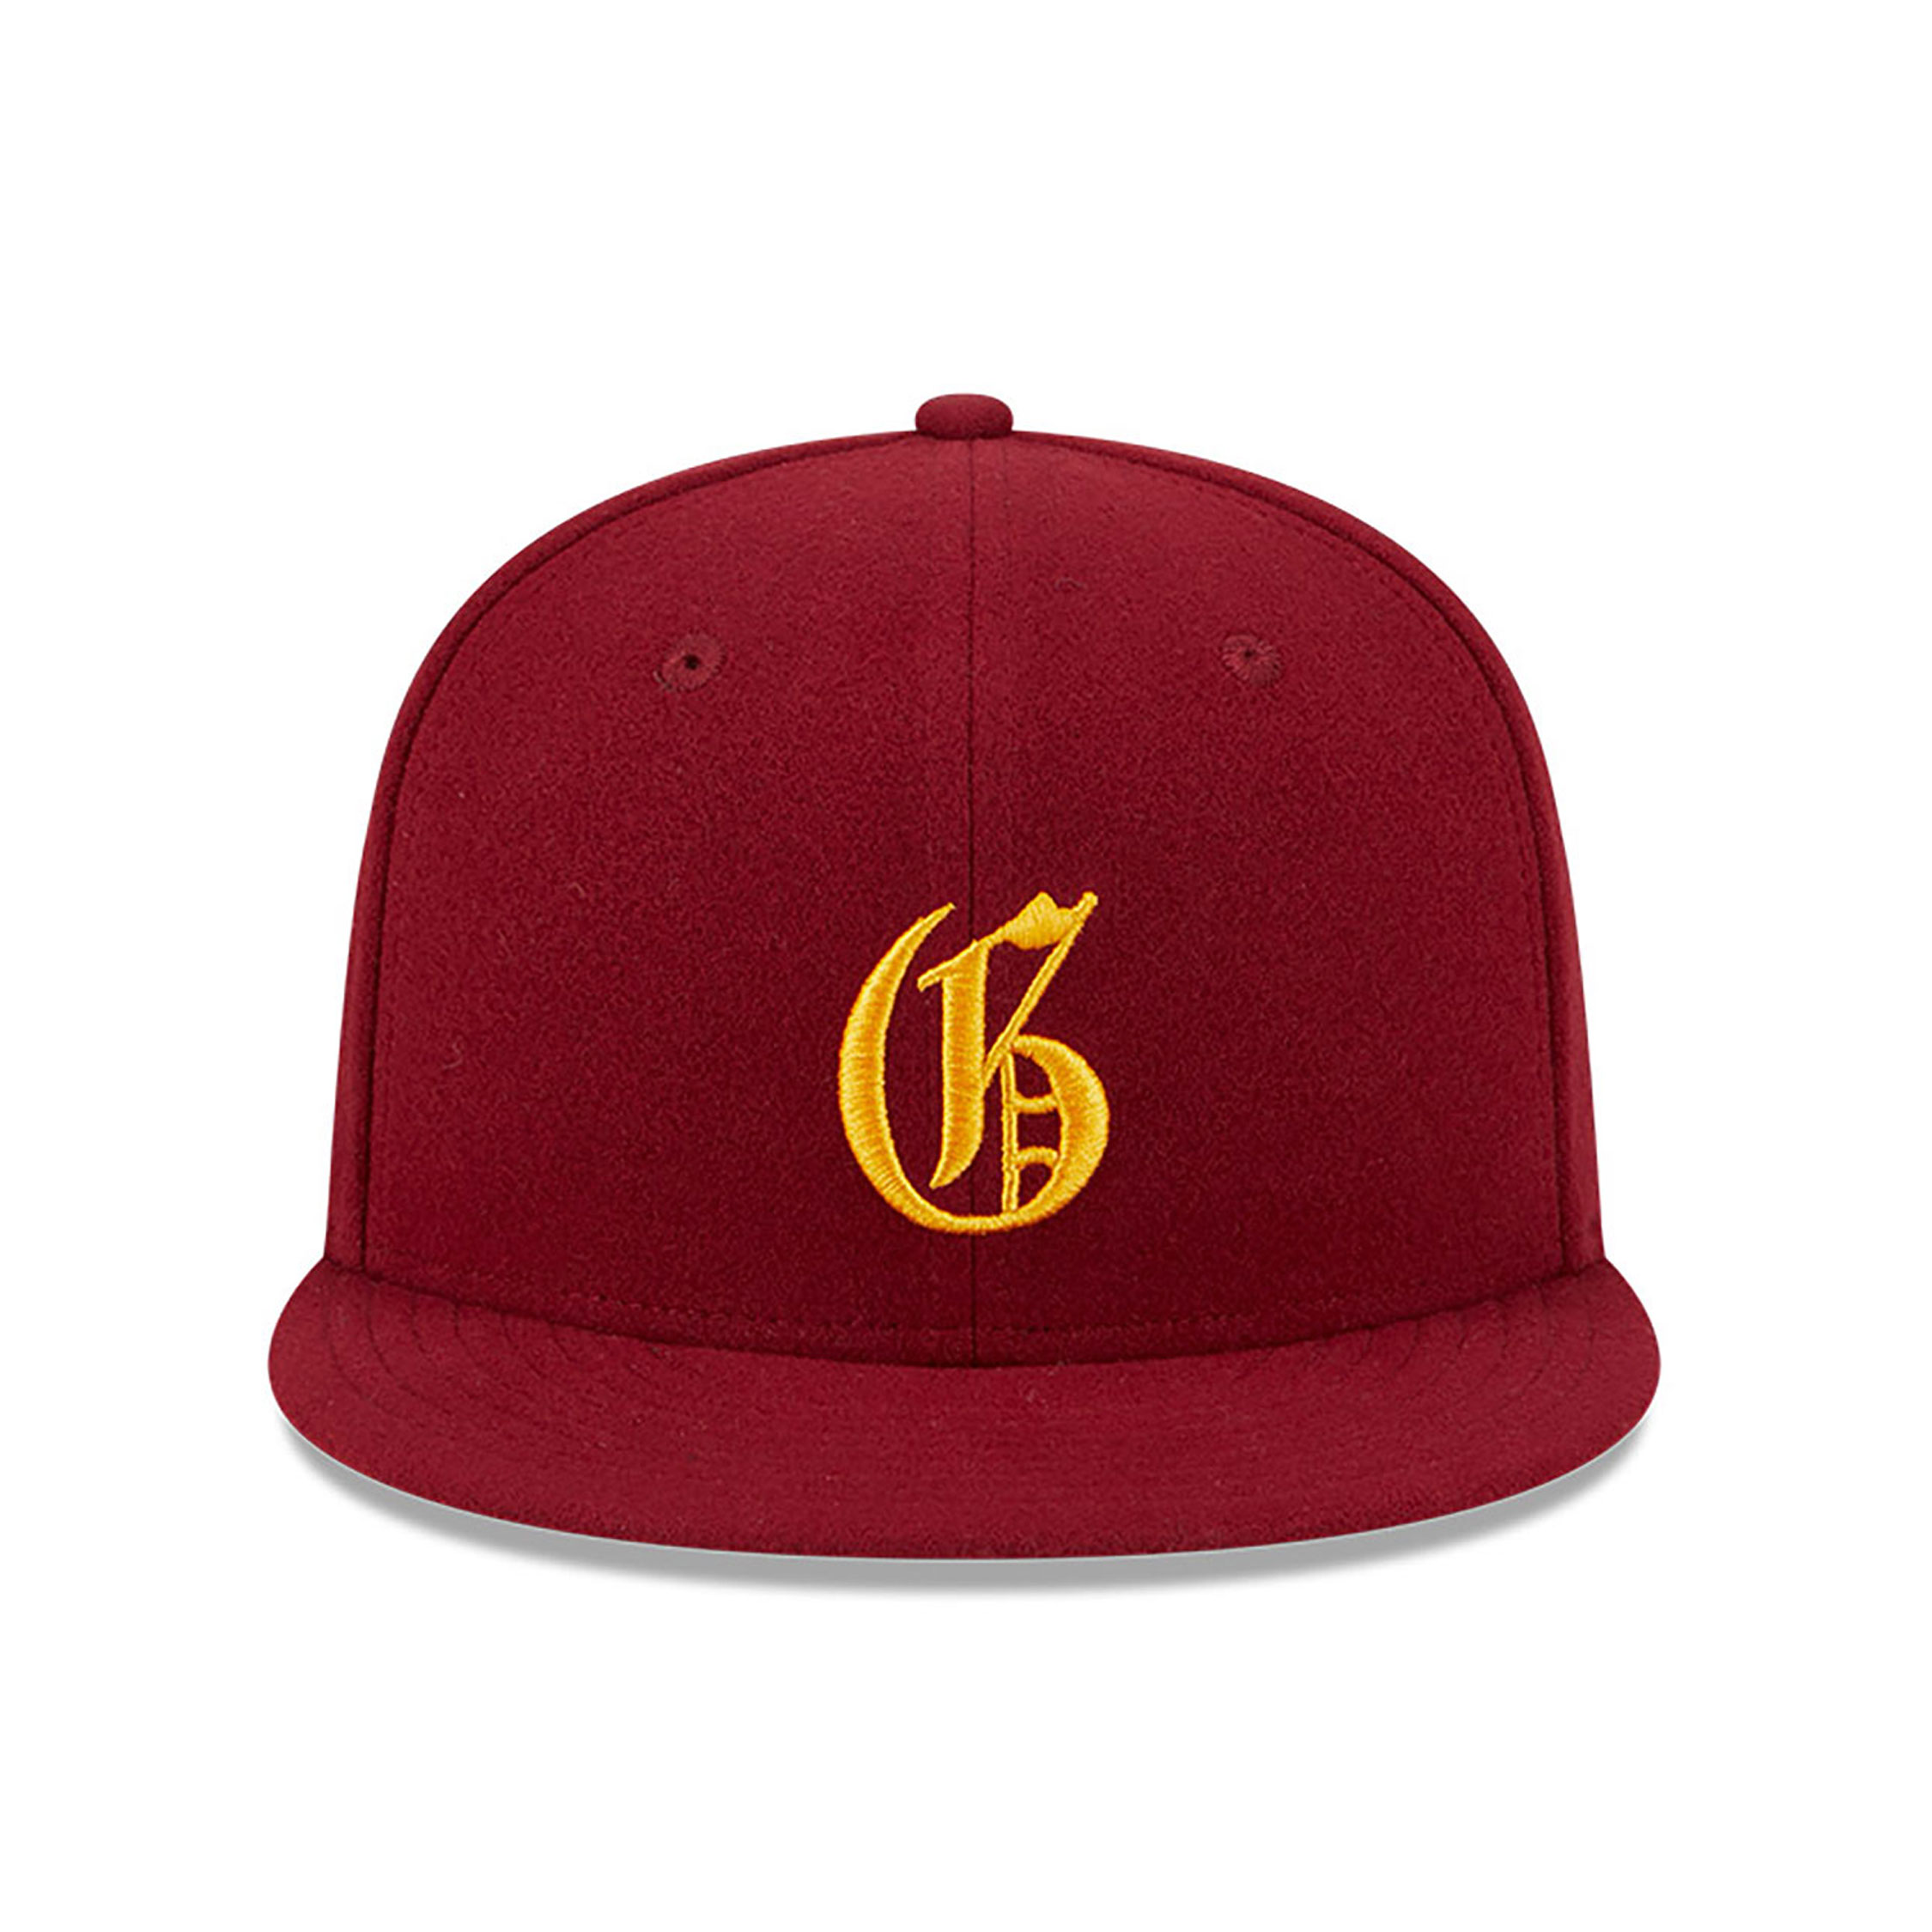 Harry Potter and the Deathly Hallows Part 2 Gryffindor Dark Red 9FIFTY Snapback Cap